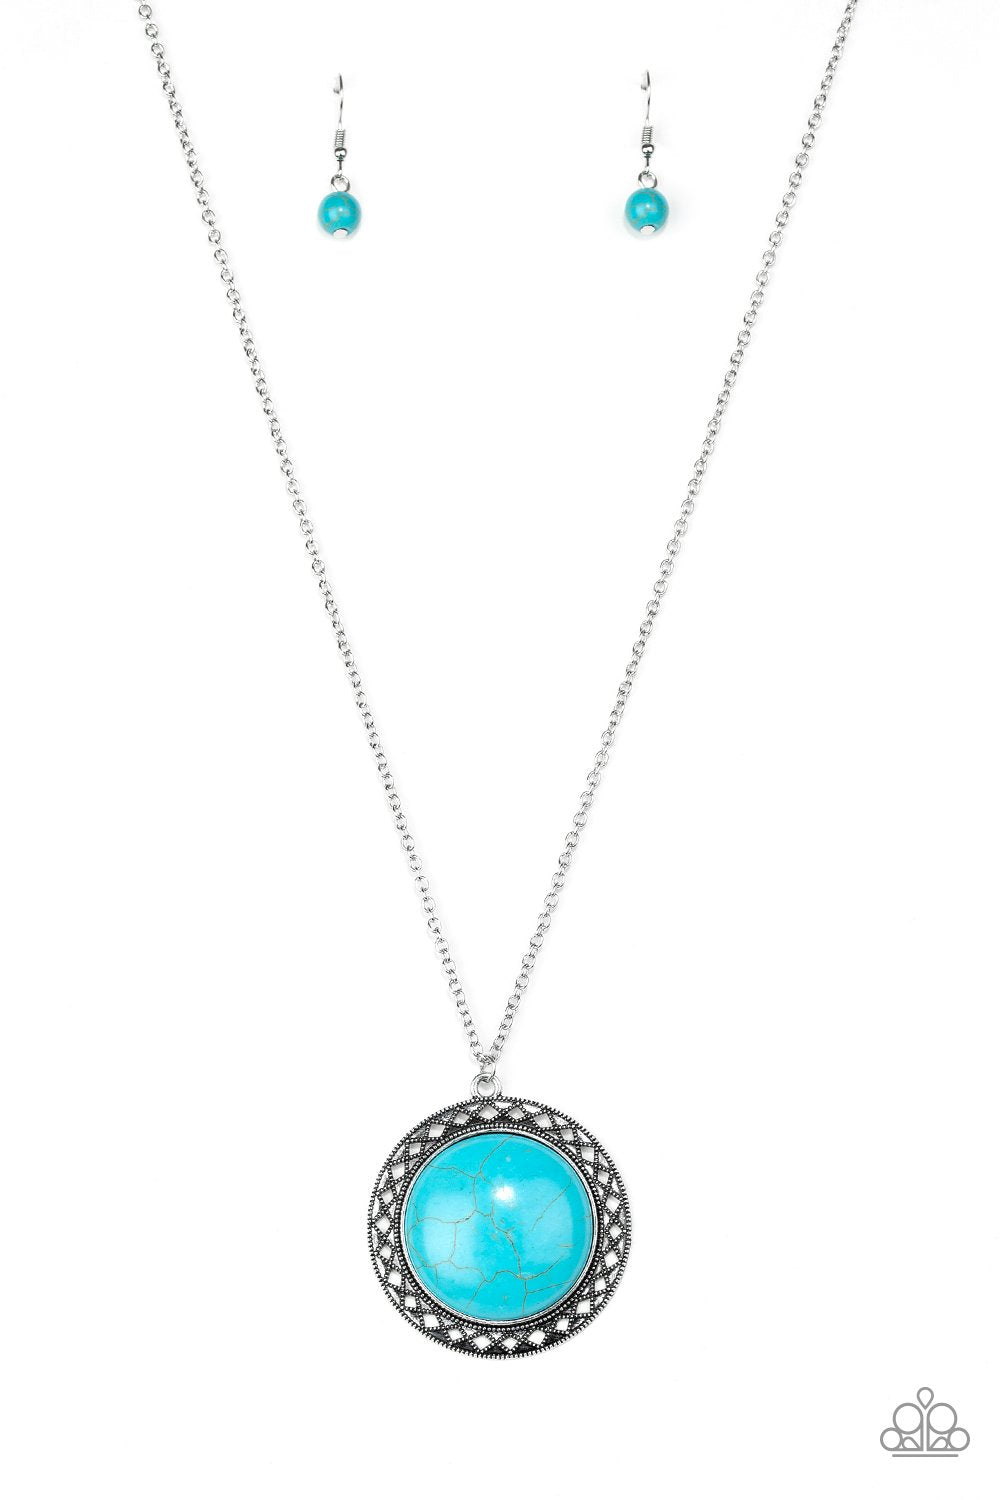 Paparazzi Necklace ~ Run Out Of RODEO - Blue